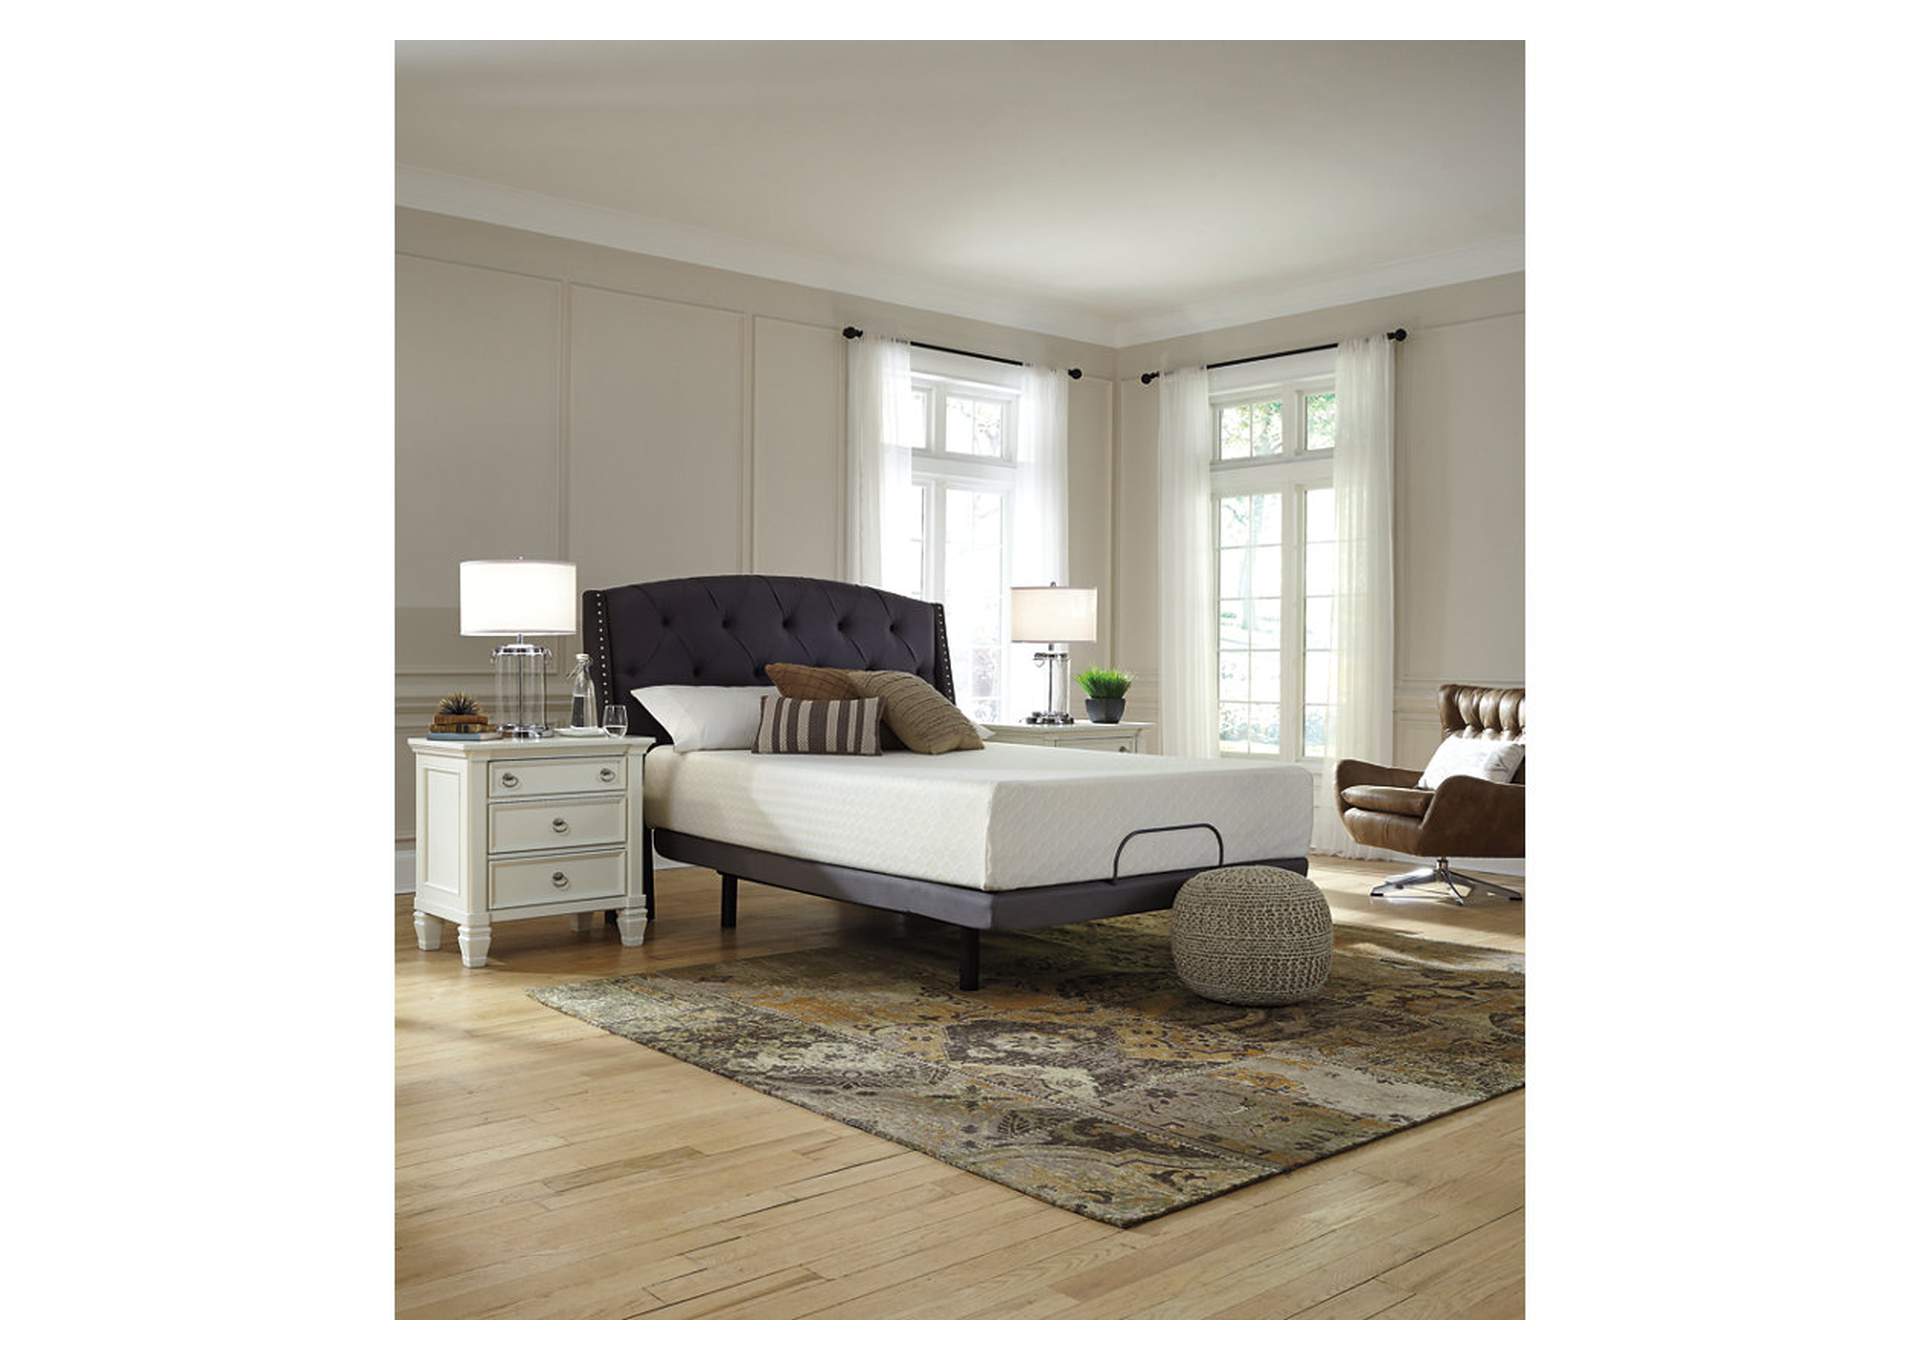 Chime 12 Inch Memory Foam Twin Mattress in a Box,Direct To Consumer Express